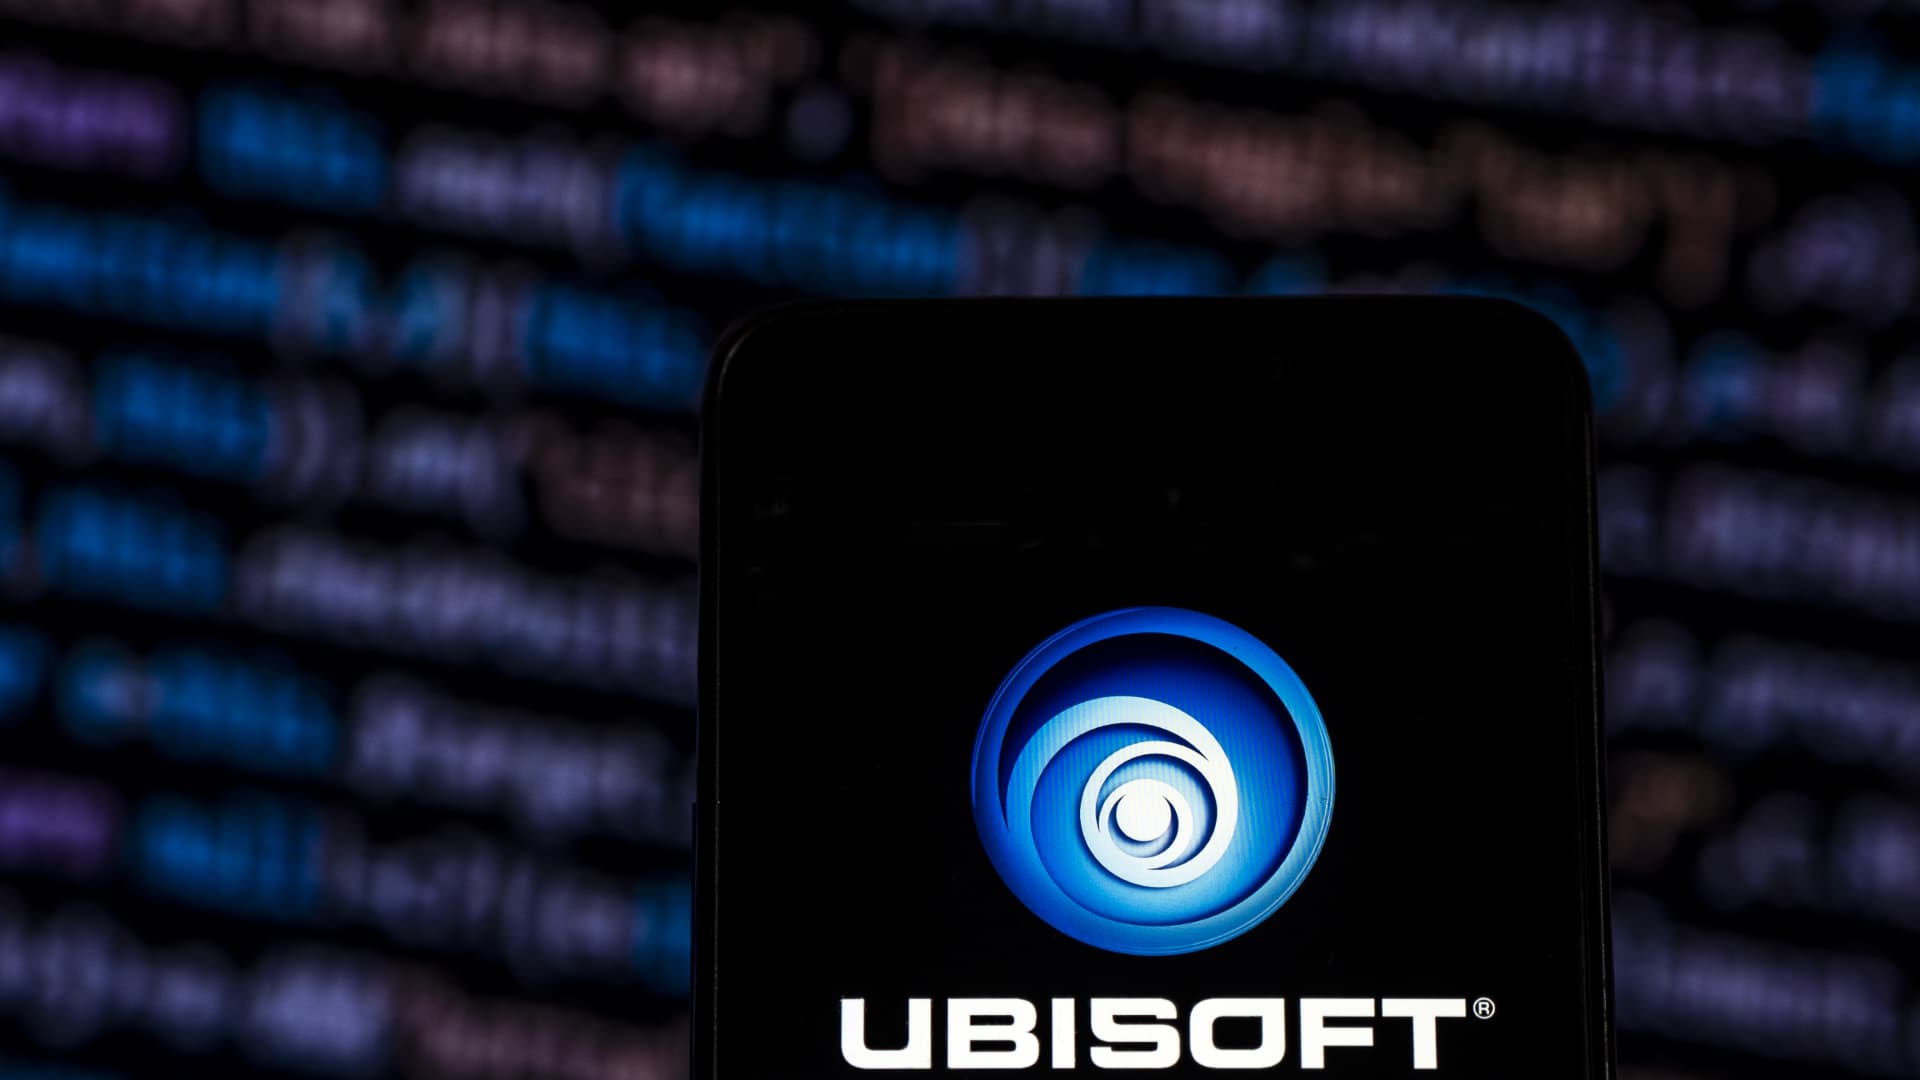 Assassin’s Creed maker Ubisoft sheds 21% to seven-year low after slashing guidance, cancelling games